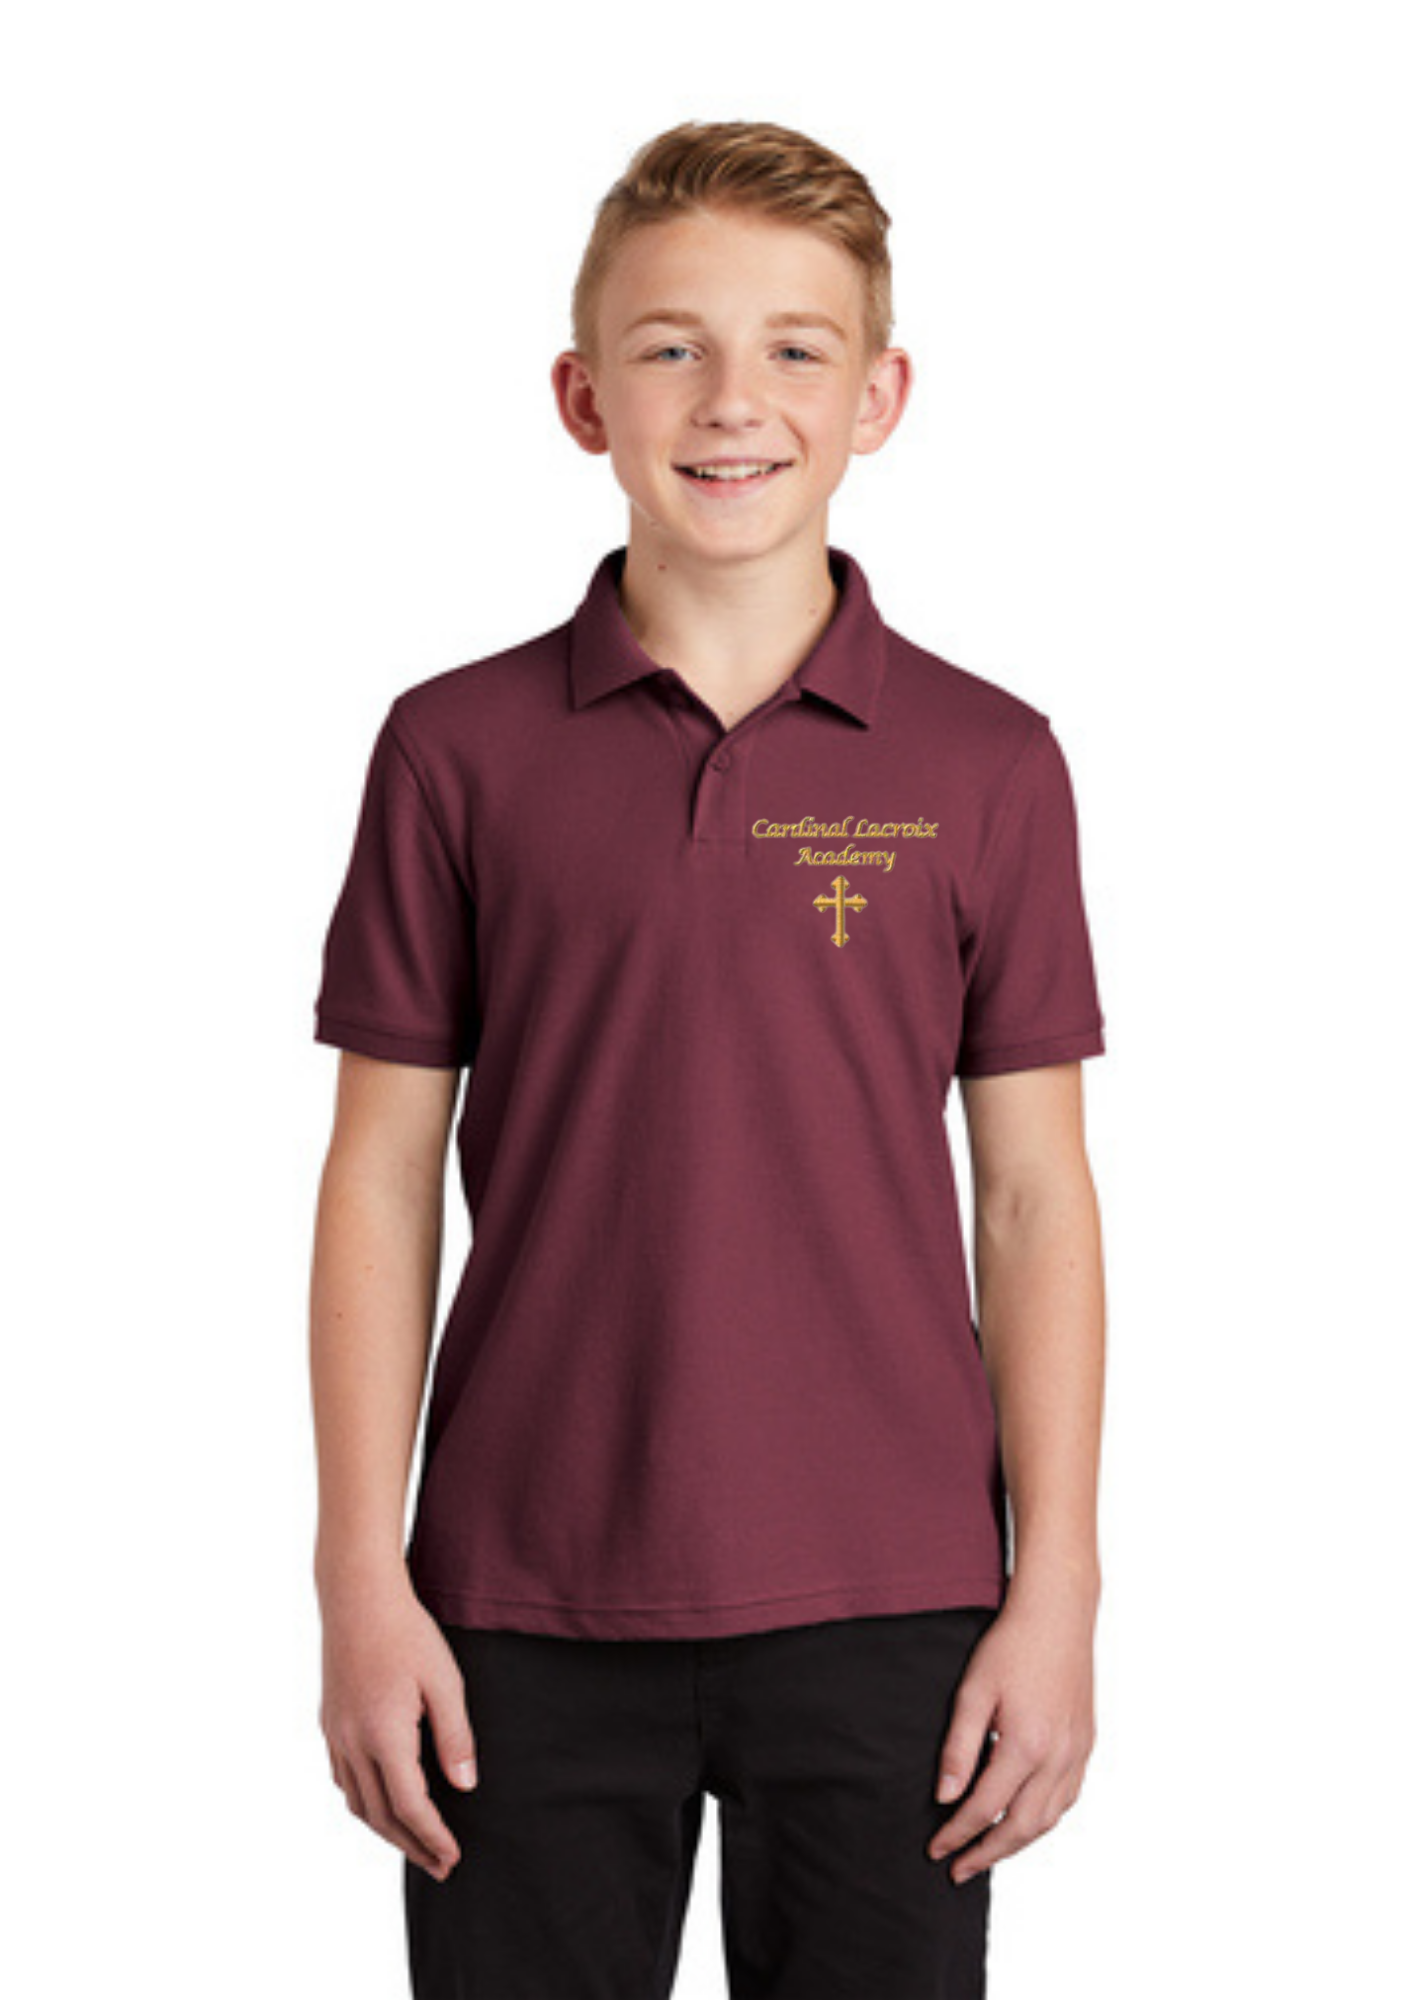 Youth Polo in White and Burgundy with Cardinal LaCroix Embroidery